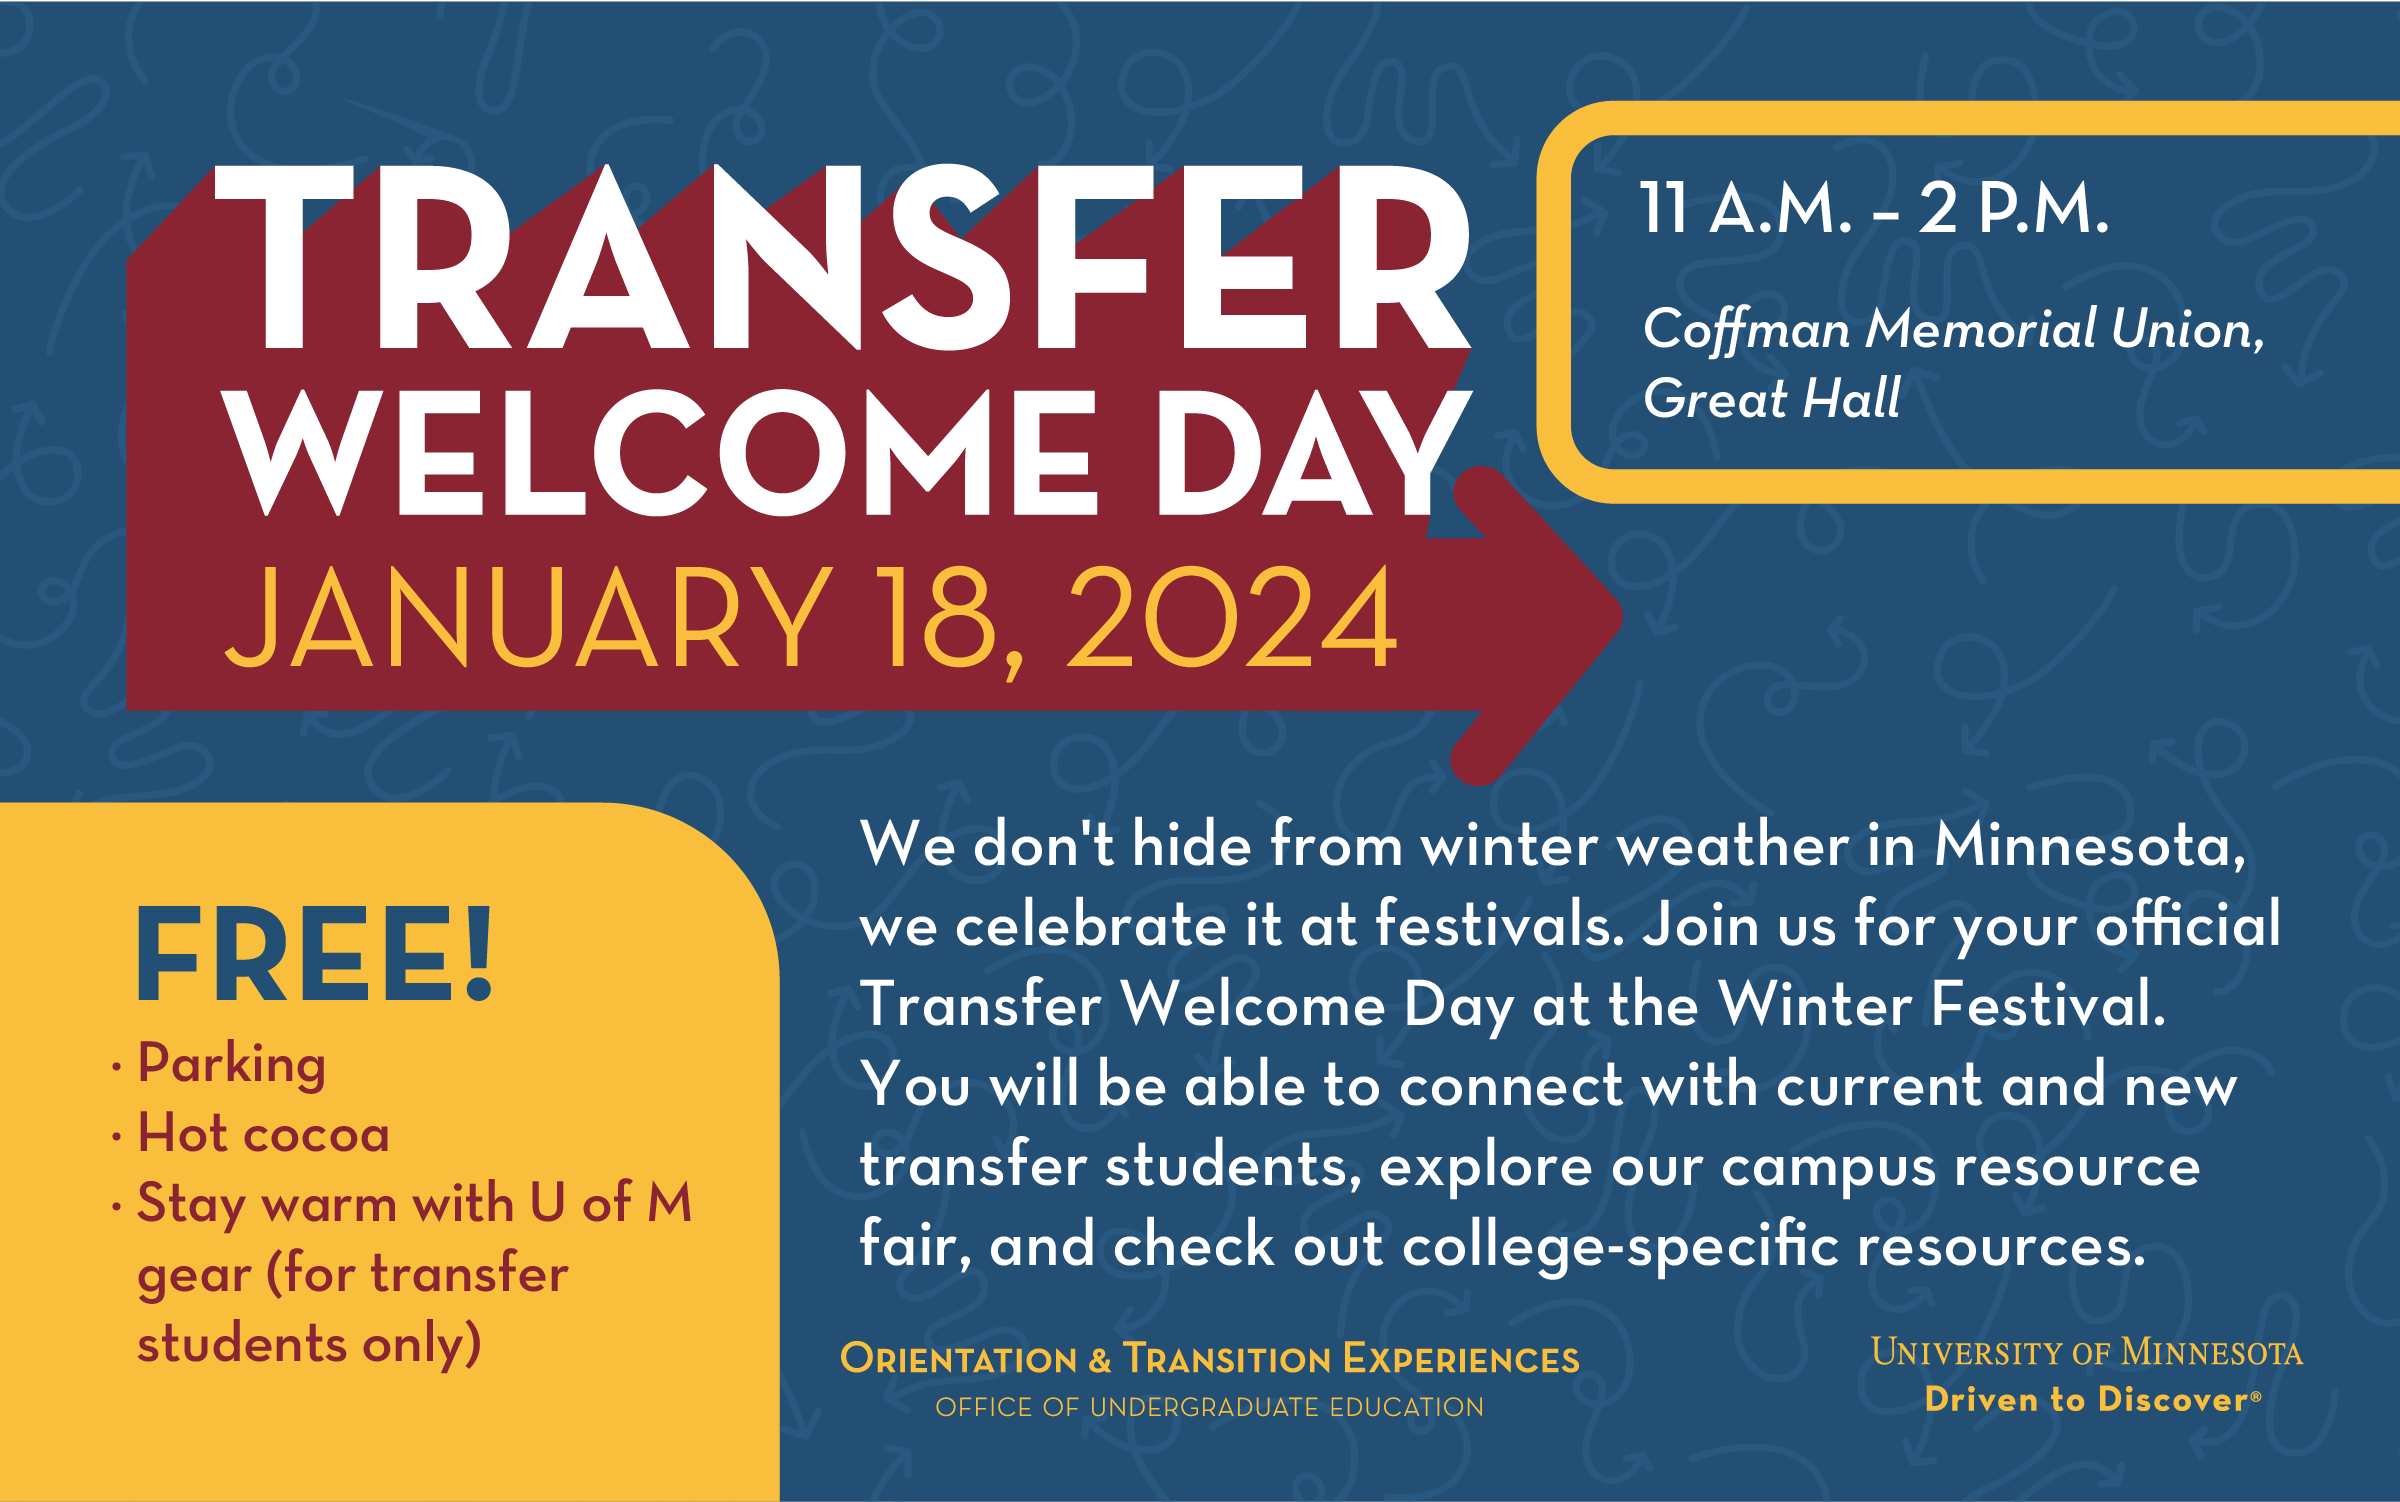 Transfer Welcome Day details